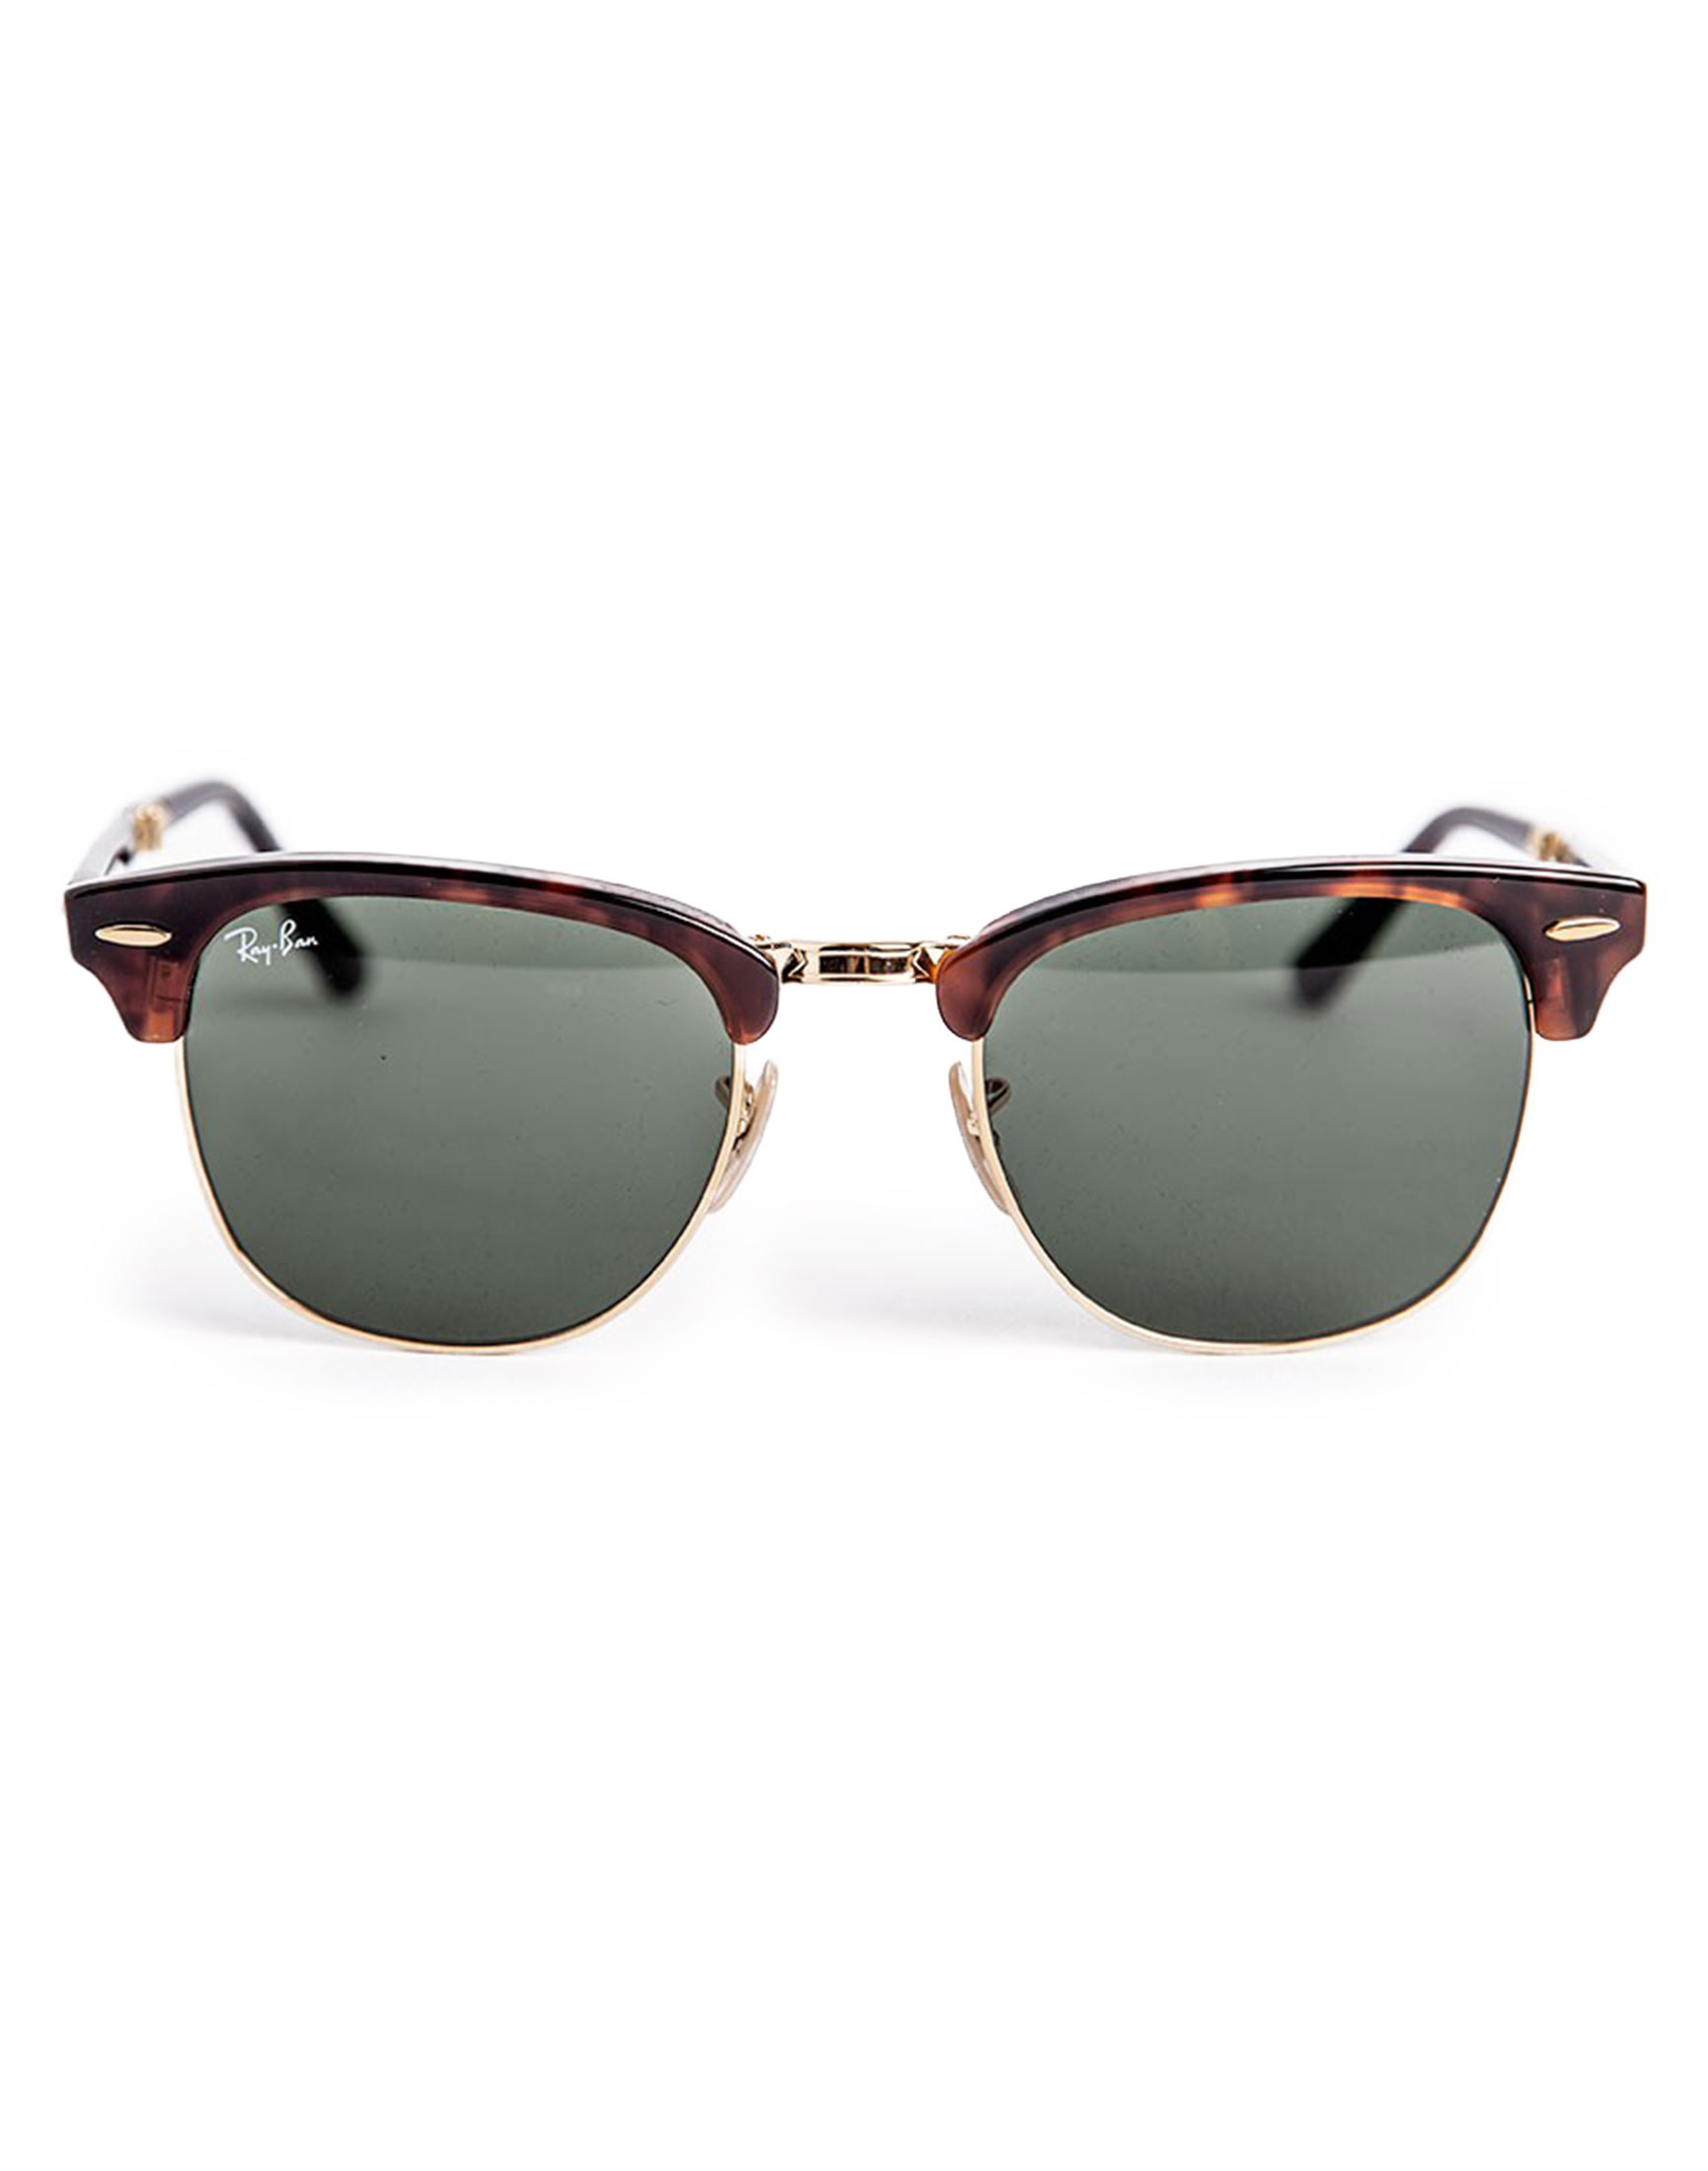 Buy Ray-Ban Iconic Folding Clubmaster Sunglasses RB2176 990